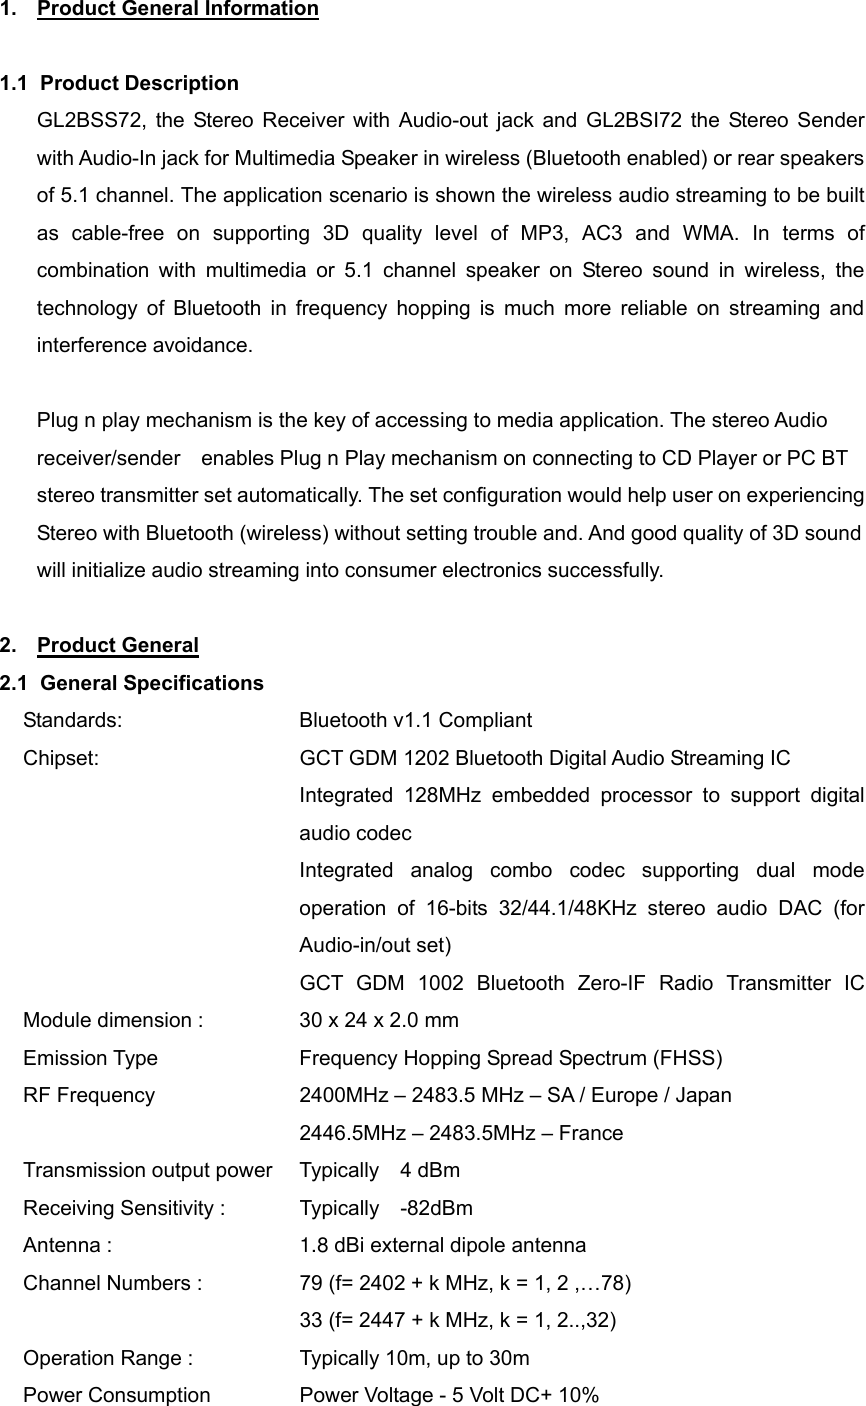 1.  Product General Information  1.1 Product Description GL2BSS72, the Stereo Receiver with Audio-out jack and GL2BSI72 the Stereo Sender with Audio-In jack for Multimedia Speaker in wireless (Bluetooth enabled) or rear speakers of 5.1 channel. The application scenario is shown the wireless audio streaming to be built as cable-free on supporting 3D quality level of MP3, AC3 and WMA. In terms of combination with multimedia or 5.1 channel speaker on Stereo sound in wireless, the technology of Bluetooth in frequency hopping is much more reliable on streaming and interference avoidance.    Plug n play mechanism is the key of accessing to media application. The stereo Audio receiver/sender    enables Plug n Play mechanism on connecting to CD Player or PC BT stereo transmitter set automatically. The set configuration would help user on experiencing Stereo with Bluetooth (wireless) without setting trouble and. And good quality of 3D sound will initialize audio streaming into consumer electronics successfully.  2. Product General 2.1 General Specifications Standards:    Bluetooth v1.1 Compliant Chipset:                GCT GDM 1202 Bluetooth Digital Audio Streaming IC Integrated 128MHz embedded processor to support digital audio codec Integrated analog combo codec supporting dual mode operation of 16-bits 32/44.1/48KHz stereo audio DAC (for Audio-in/out set)                          GCT GDM 1002  Bluetooth Zero-IF  Radio  Transmitter  IC            Module dimension :            30 x 24 x 2.0 mm   Emission Type      Frequency Hopping Spread Spectrum (FHSS) RF Frequency      2400MHz – 2483.5 MHz – SA / Europe / Japan                            2446.5MHz – 2483.5MHz – France Transmission output power   Typically  4 dBm Receiving Sensitivity :        Typically  -82dBm Antenna :                 1.8 dBi external dipole antenna Channel Numbers :                79 (f= 2402 + k MHz, k = 1, 2 ,…78)               33 (f= 2447 + k MHz, k = 1, 2..,32) Operation Range :                Typically 10m, up to 30m Power Consumption                Power Voltage - 5 Volt DC+ 10% 